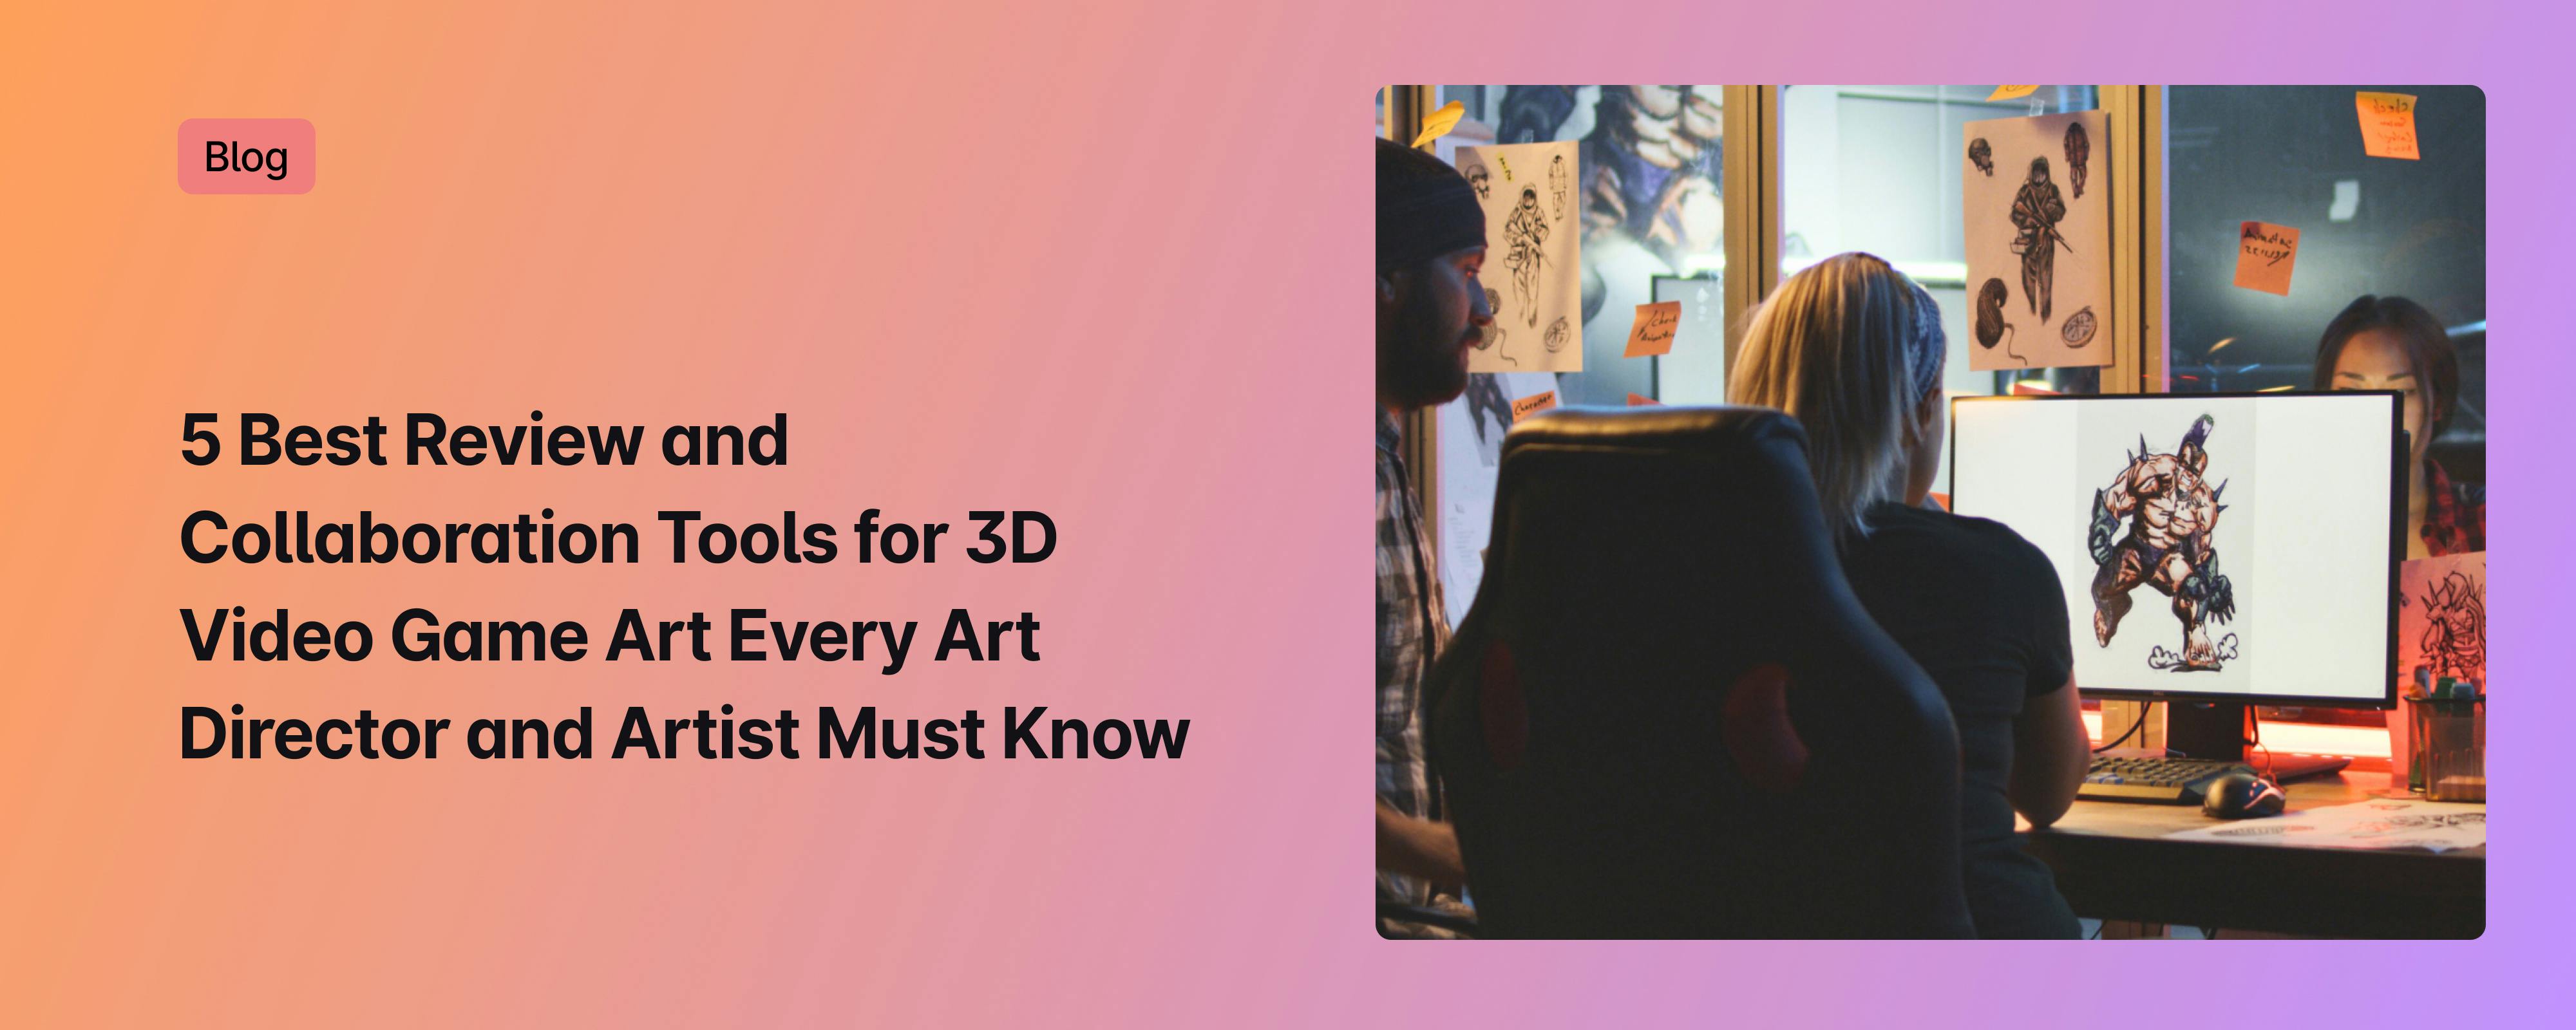 5 Best Review and Collaboration Tools for 3D Video Game Art Every Art Director and Artist Must Know